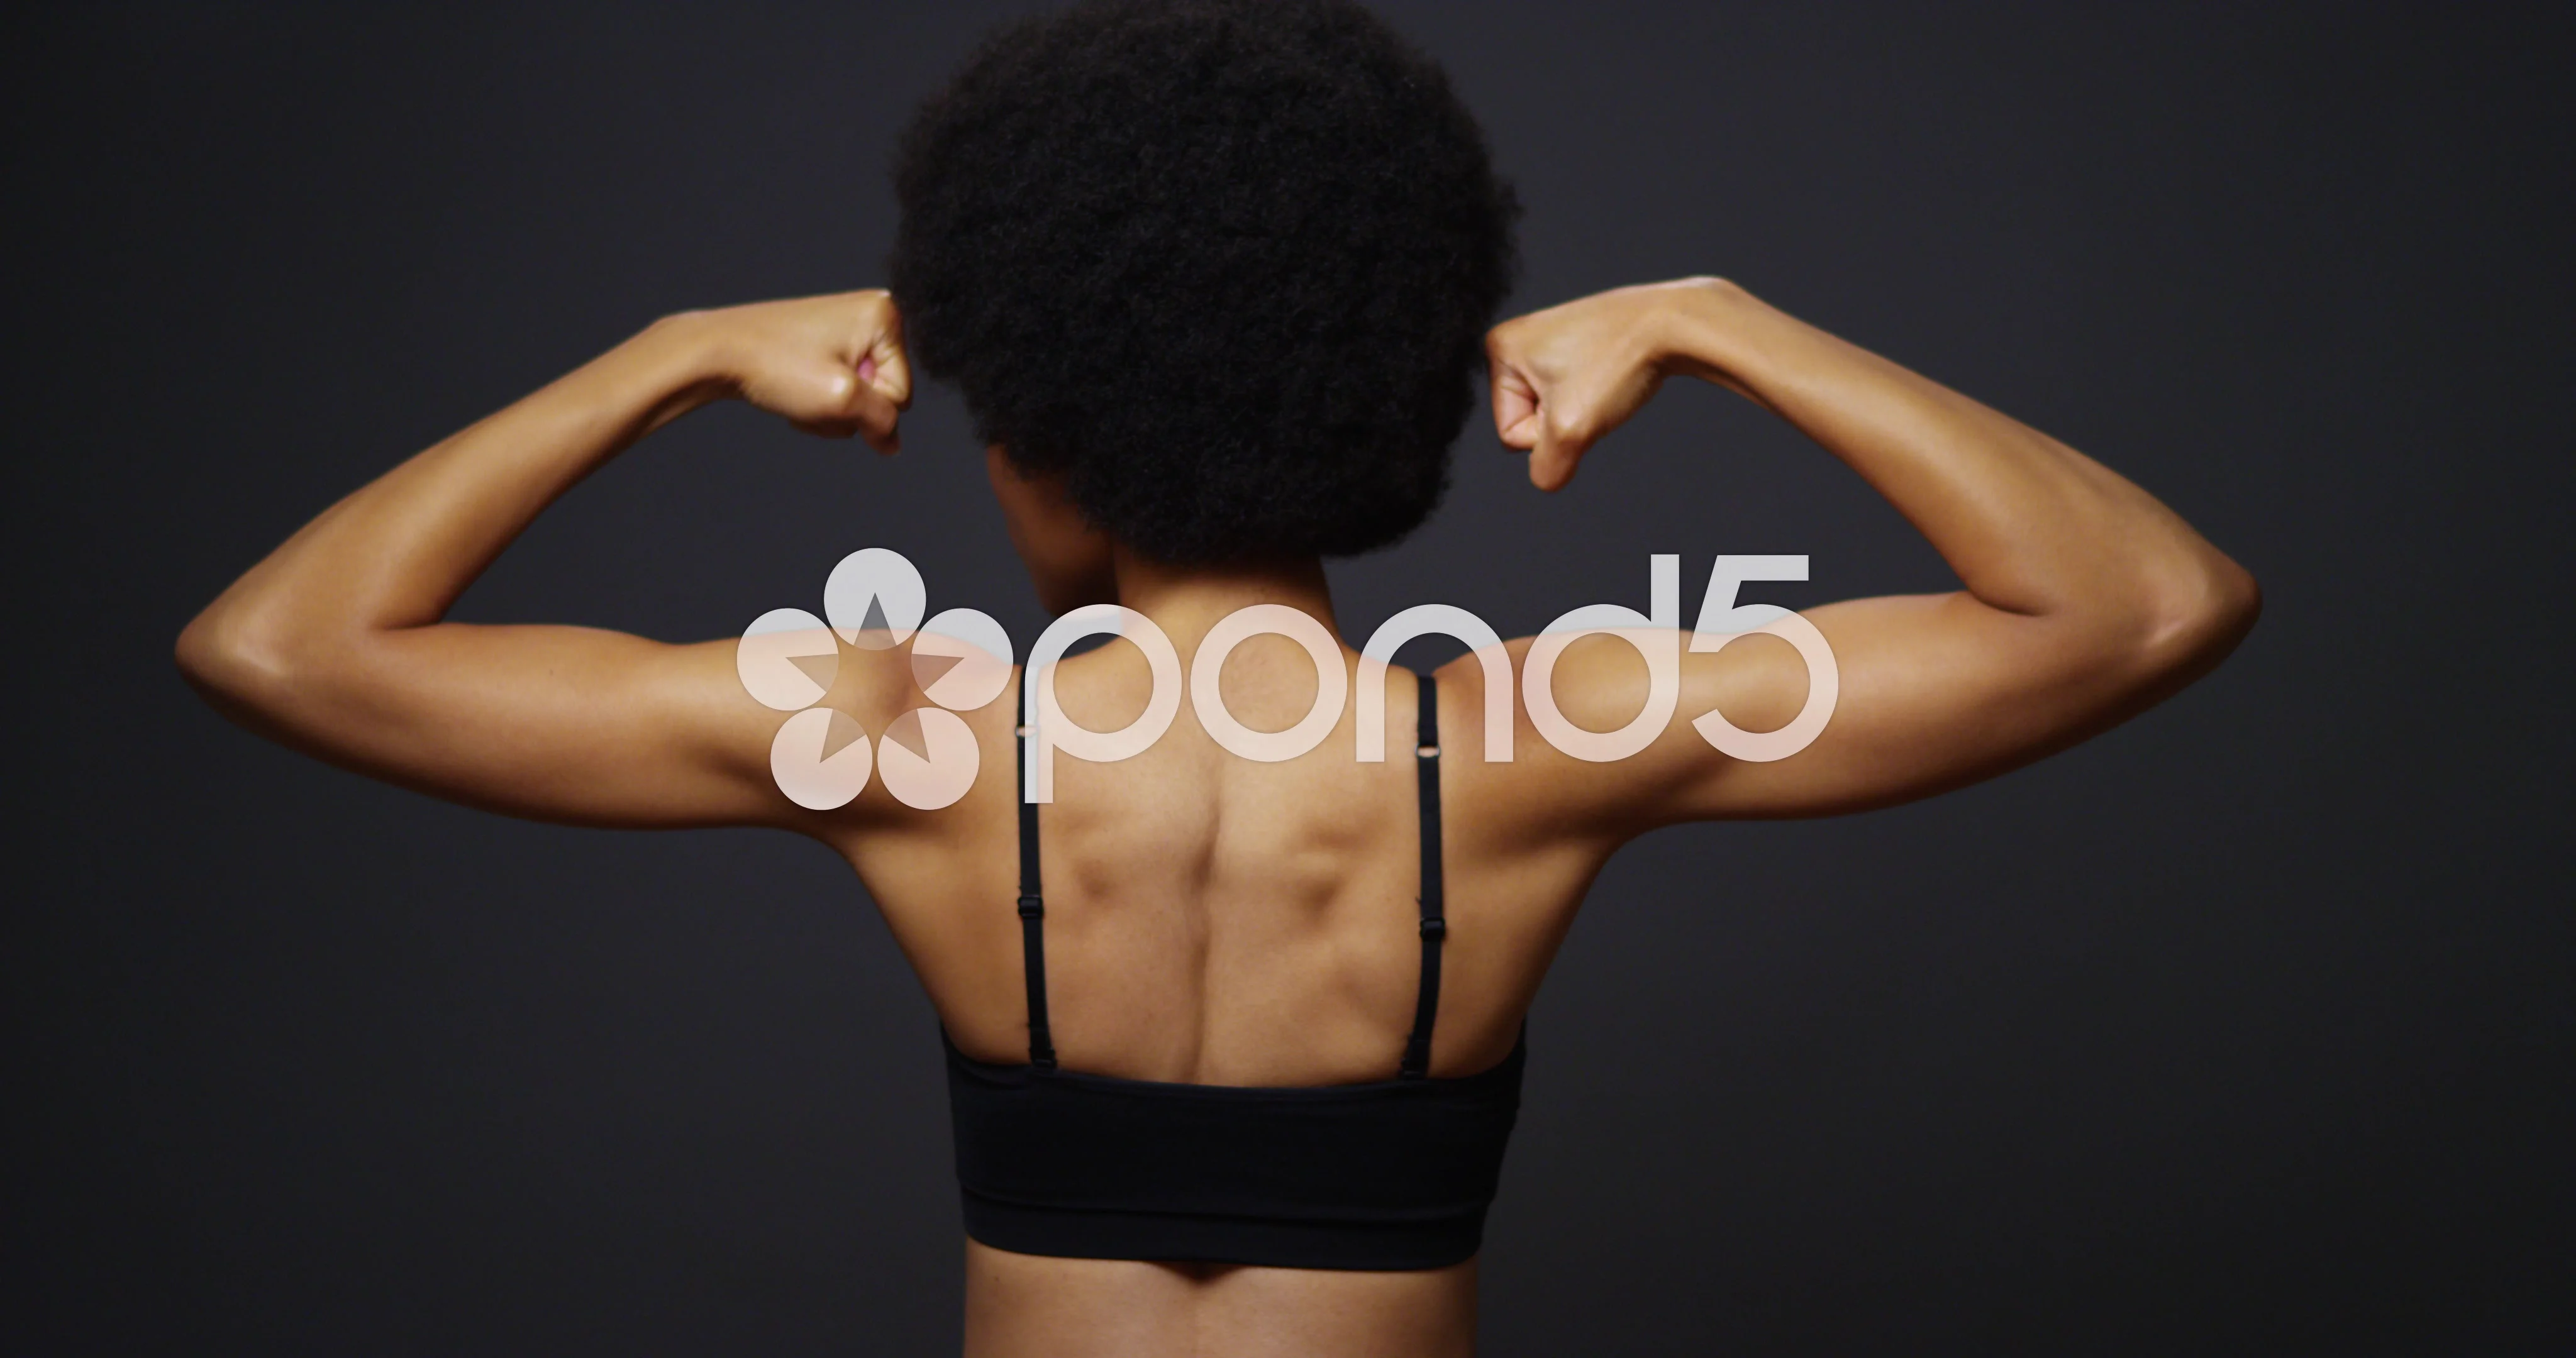 Rear view of Black woman flexing muscles, Stock Video